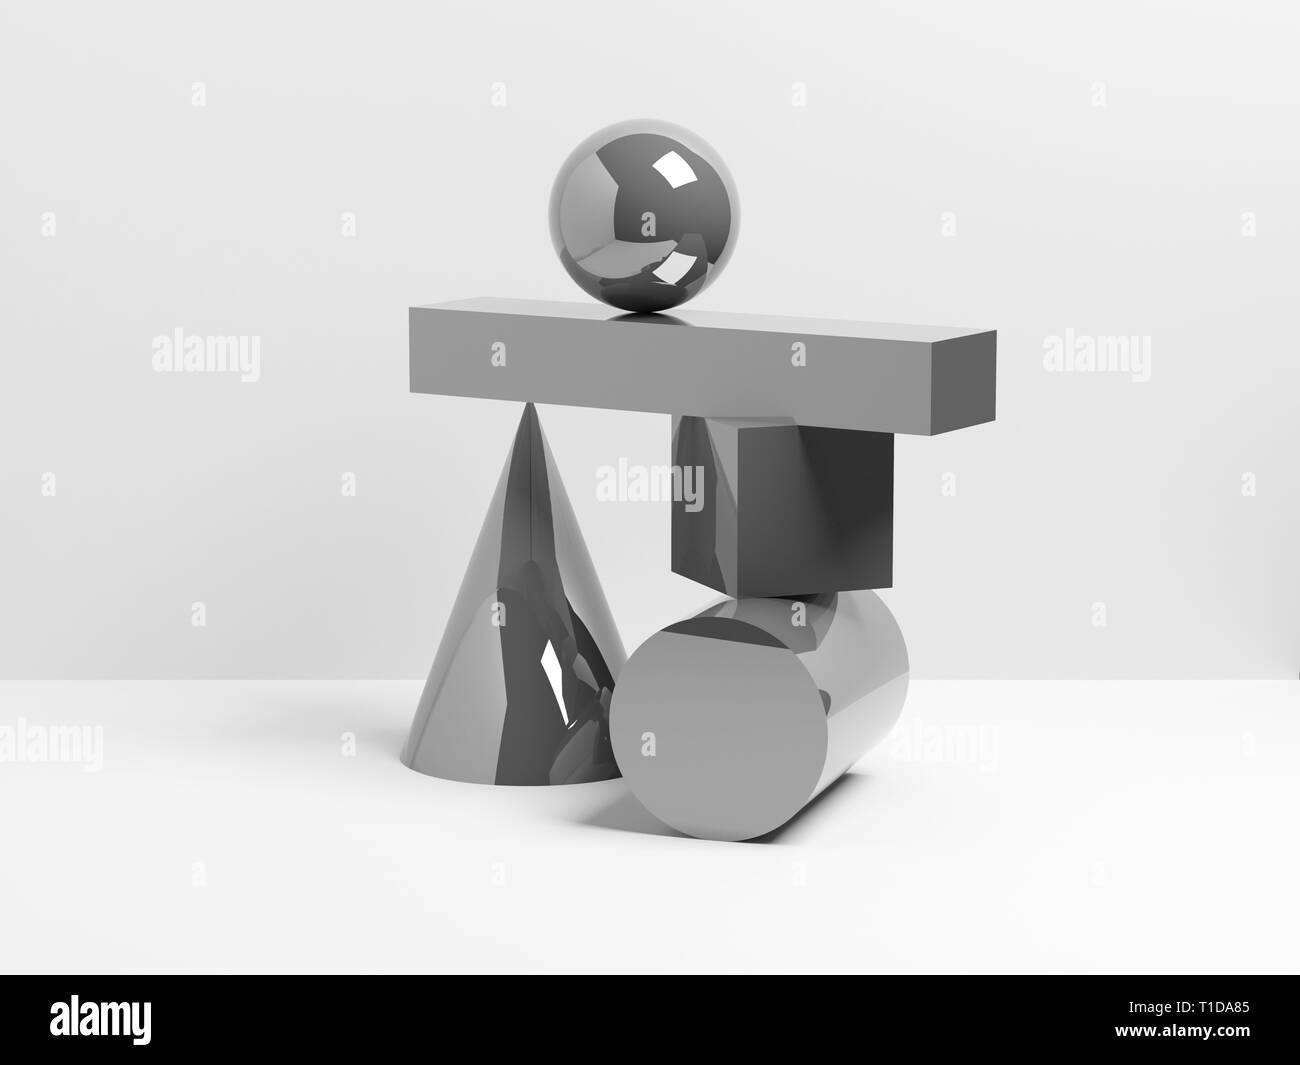 Abstract equilibrium concept, installation of metallic primitive geometric shapes. 3d render illustration Stock Photo